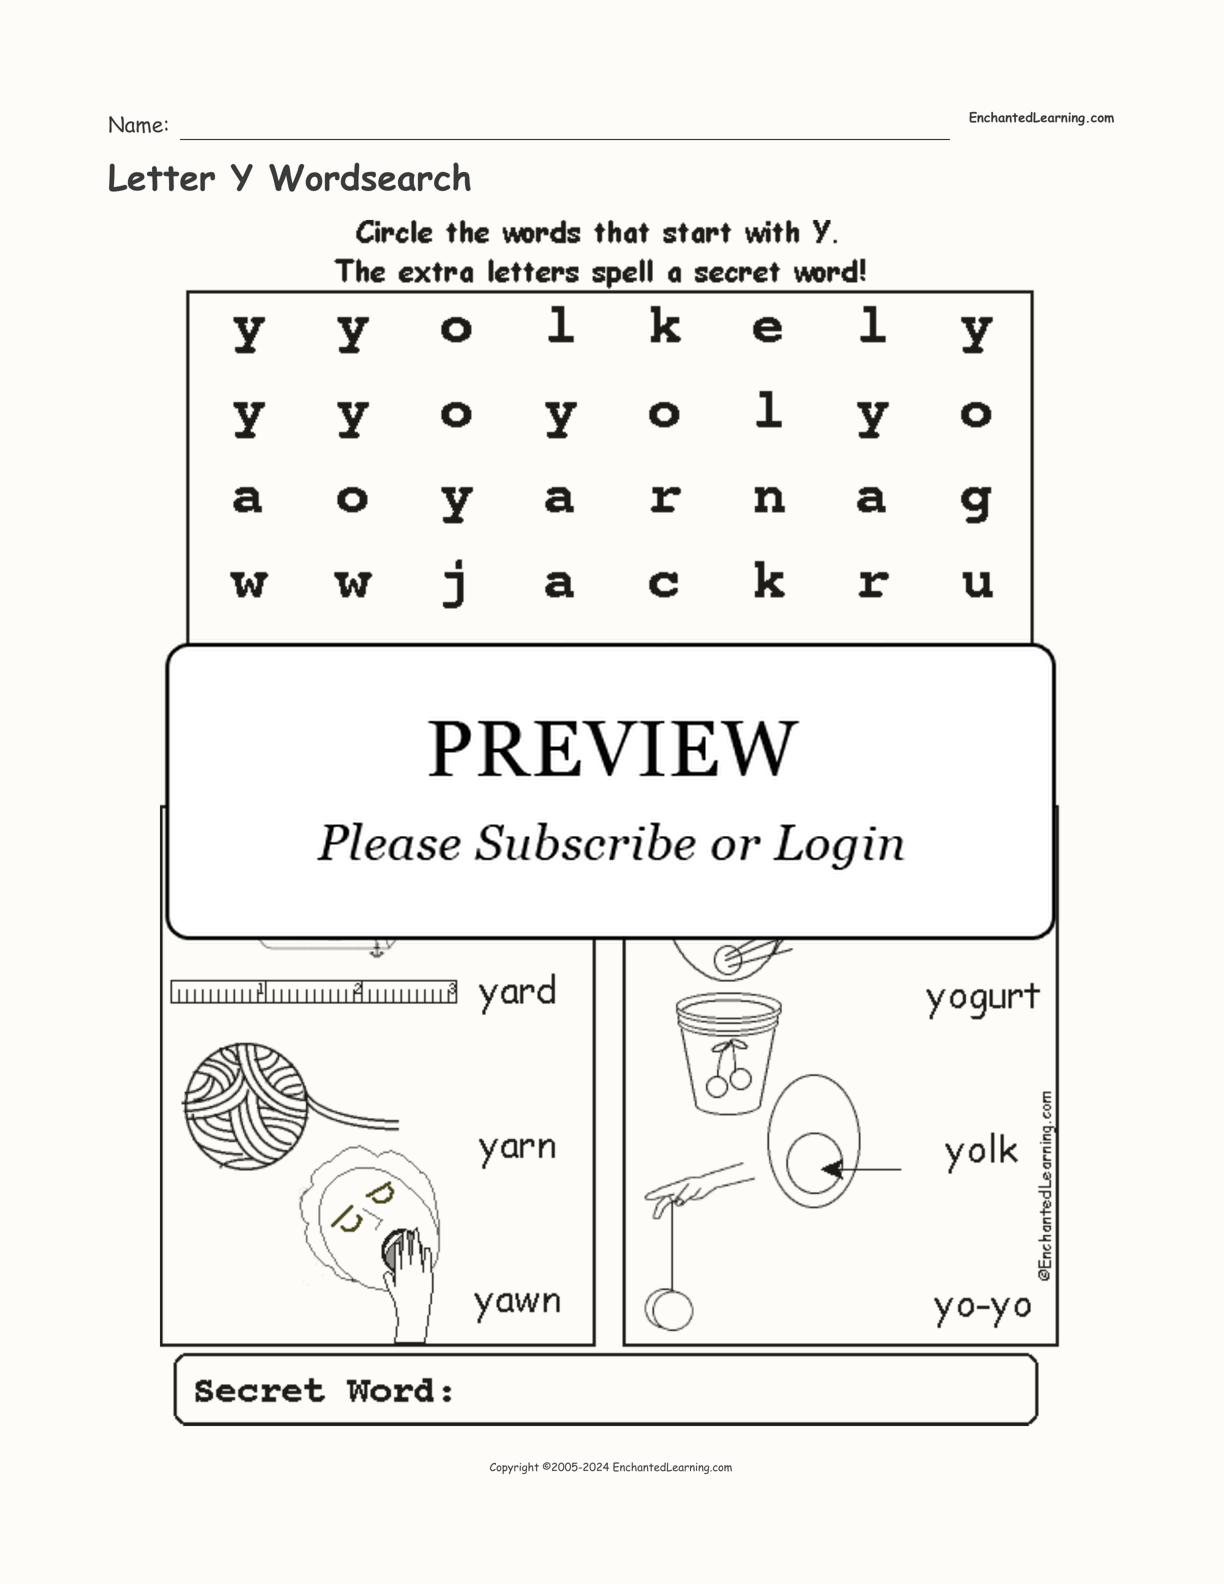 Letter Y Wordsearch interactive worksheet page 1